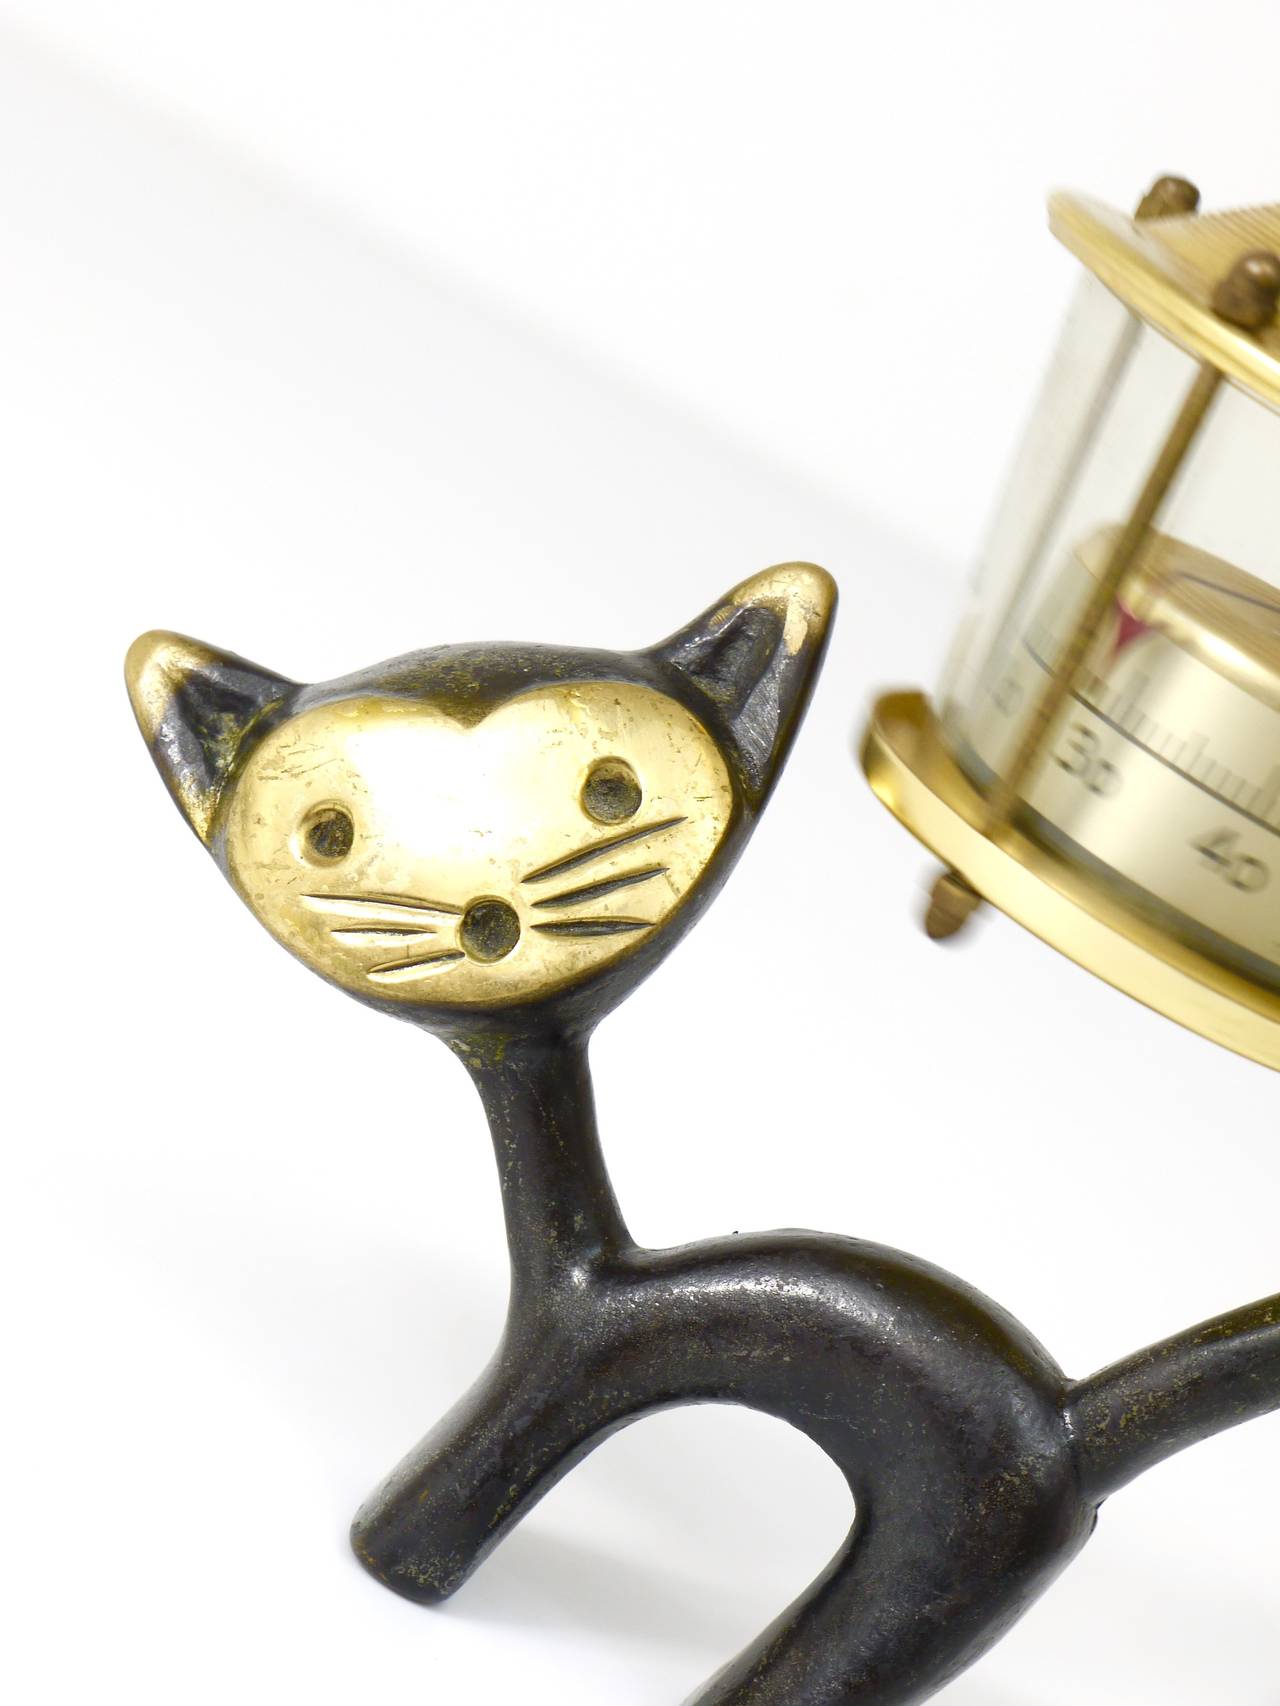 A charming Austrian desk thermometer, consisting of a lovely cat figurine and a lantern-shaped thermometer. A humorous design by Walter Bosse, executed by Hertha Baller Austria in the 1950s. Made of brass, in very good condition, nice patina.